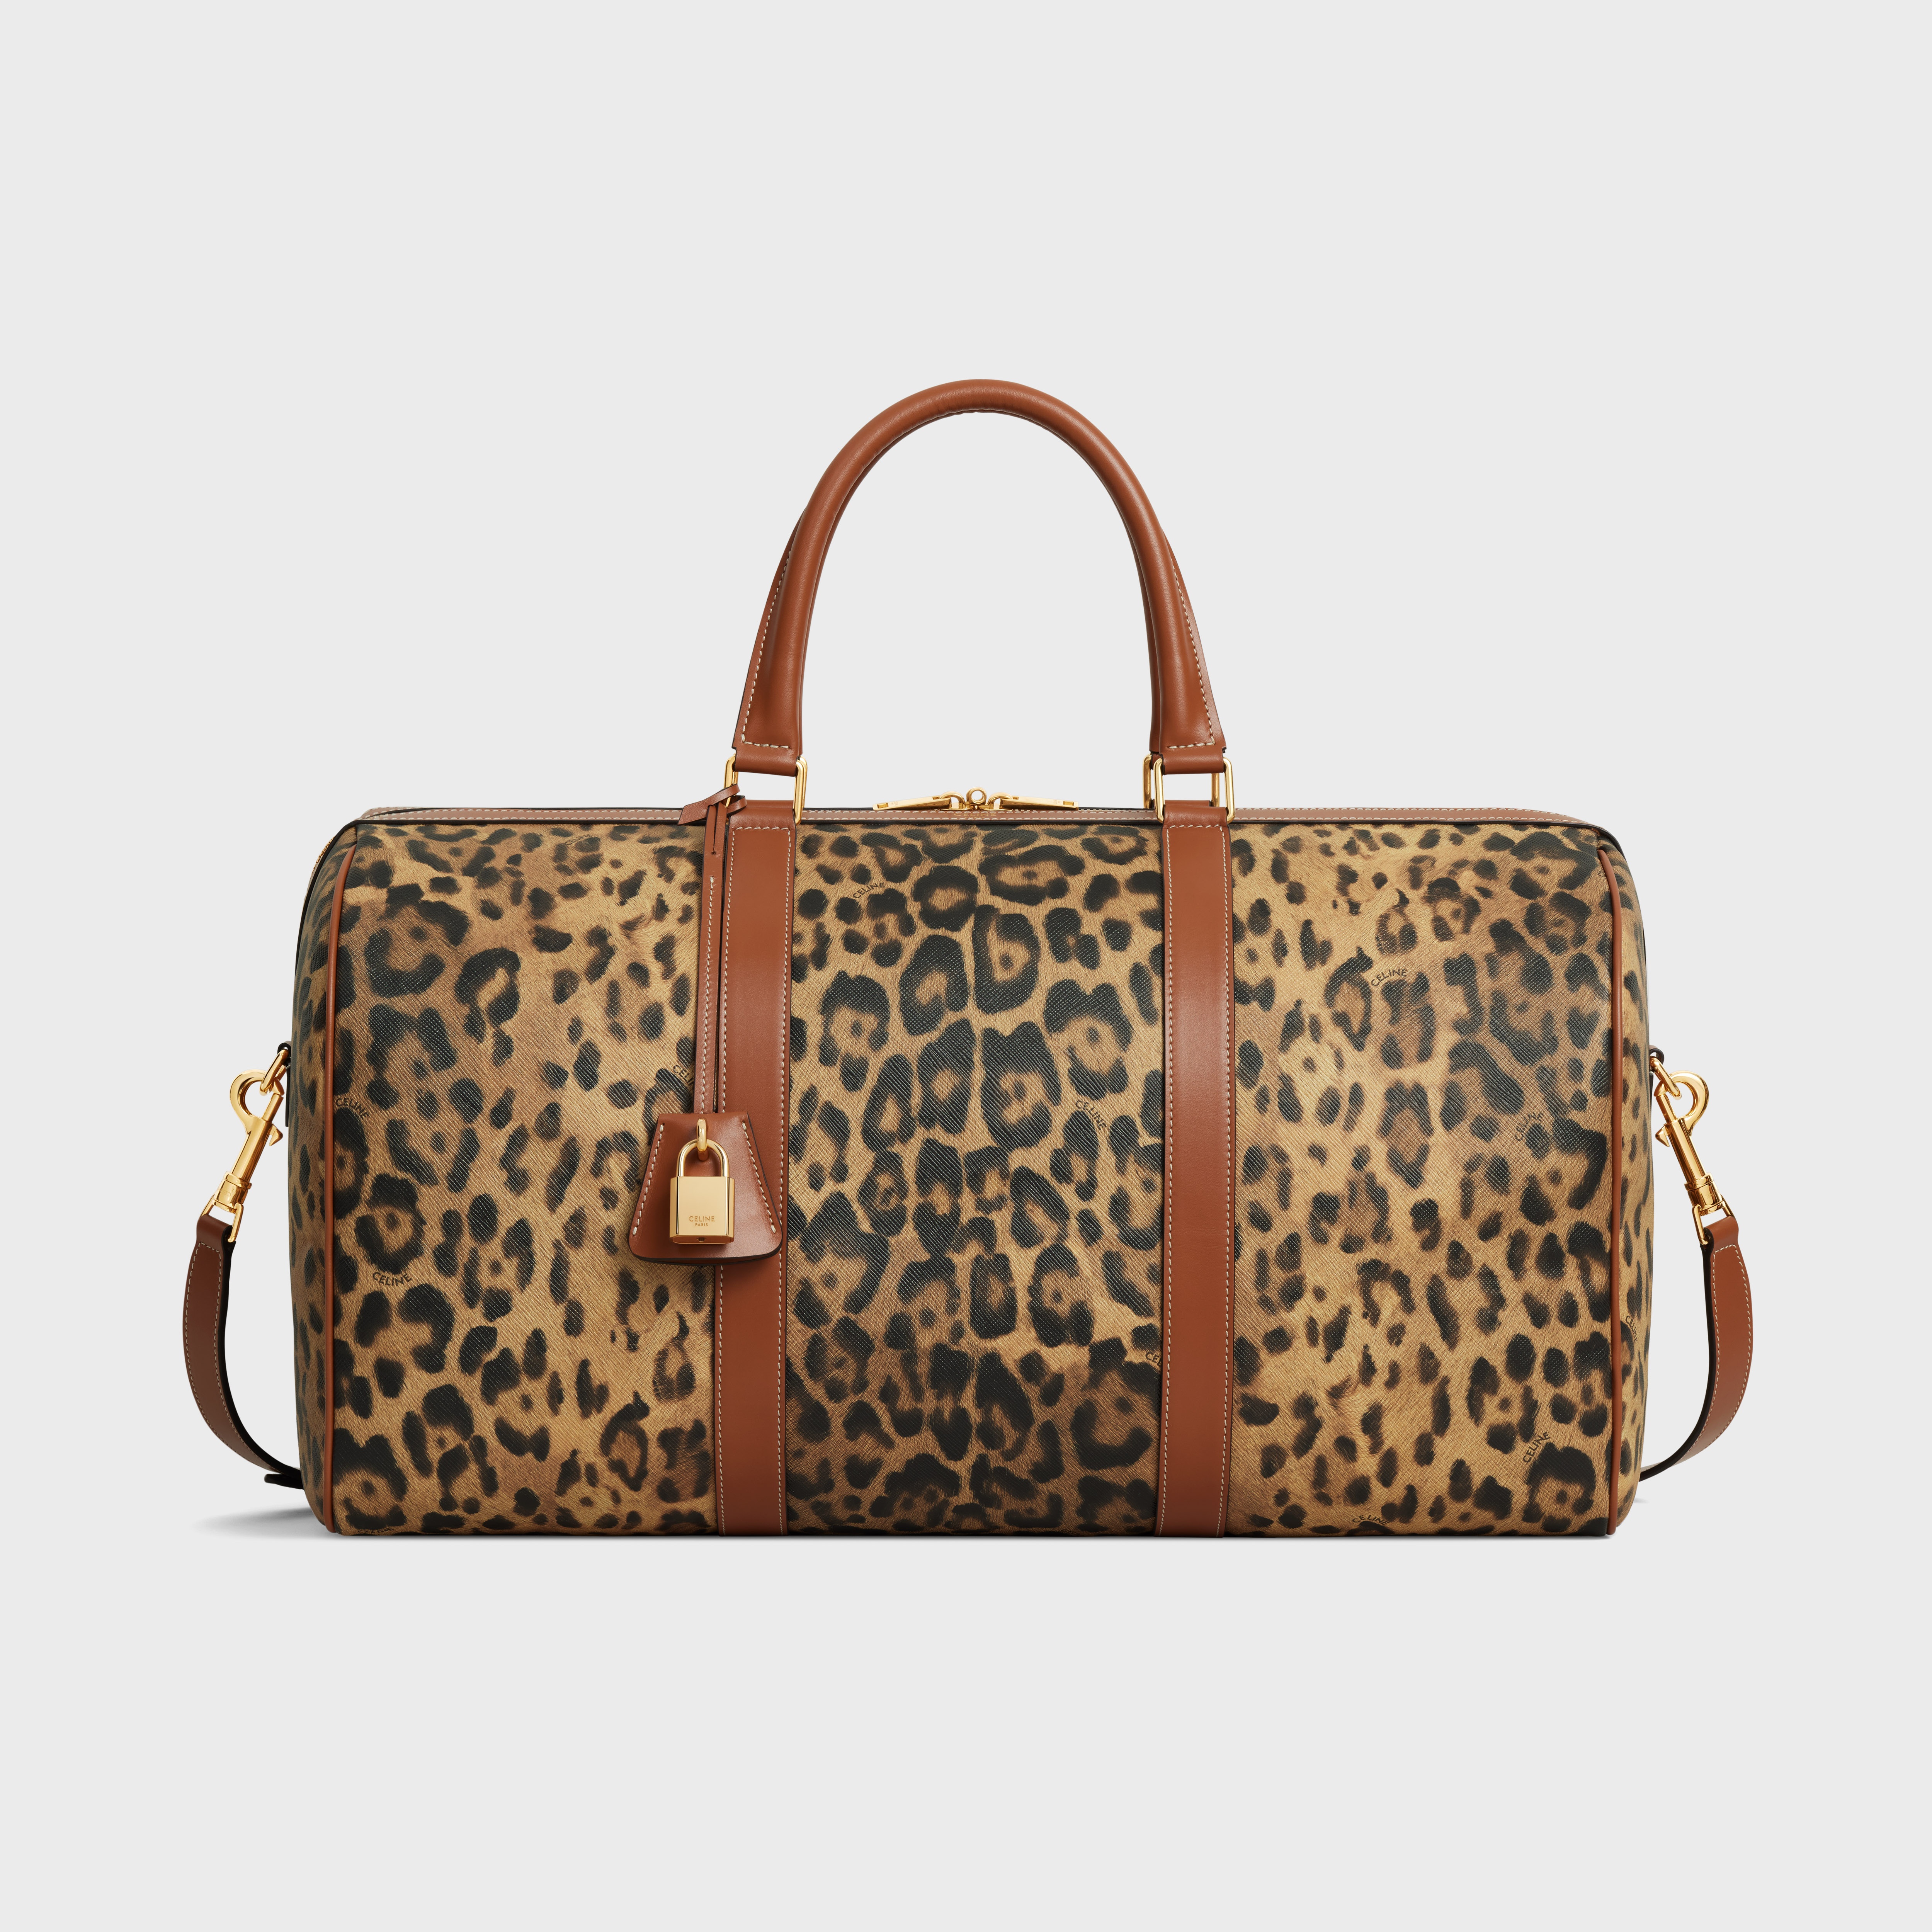 Medium Travel Bag in Celine canvas with leopard print - 1